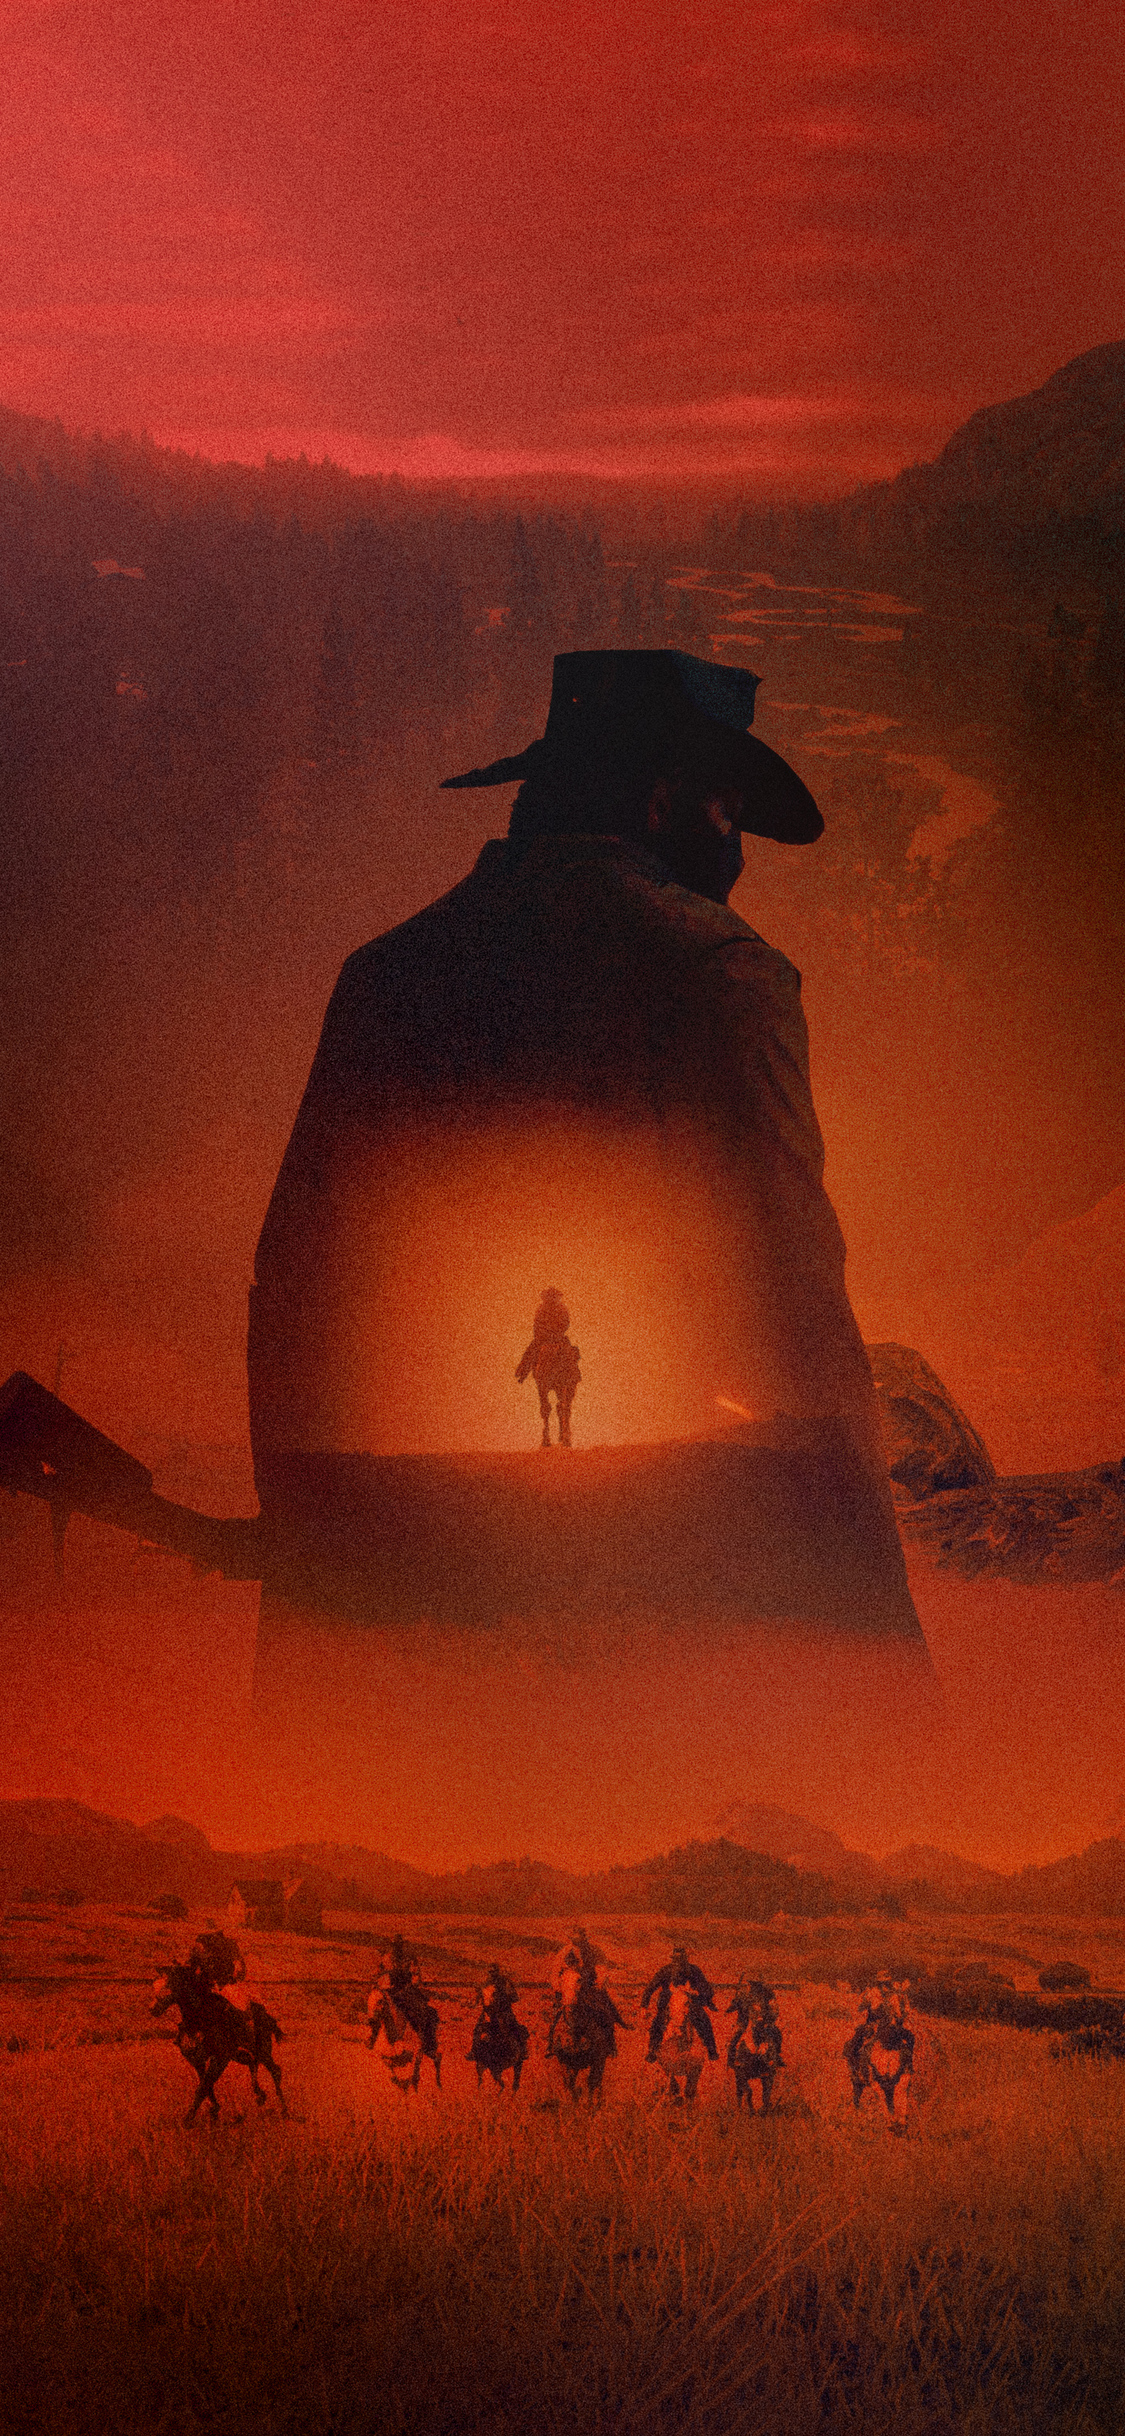 1125x2436 Red Dead Redemption 2 Poster Key Art 2018 Iphone XS,Iphone 10